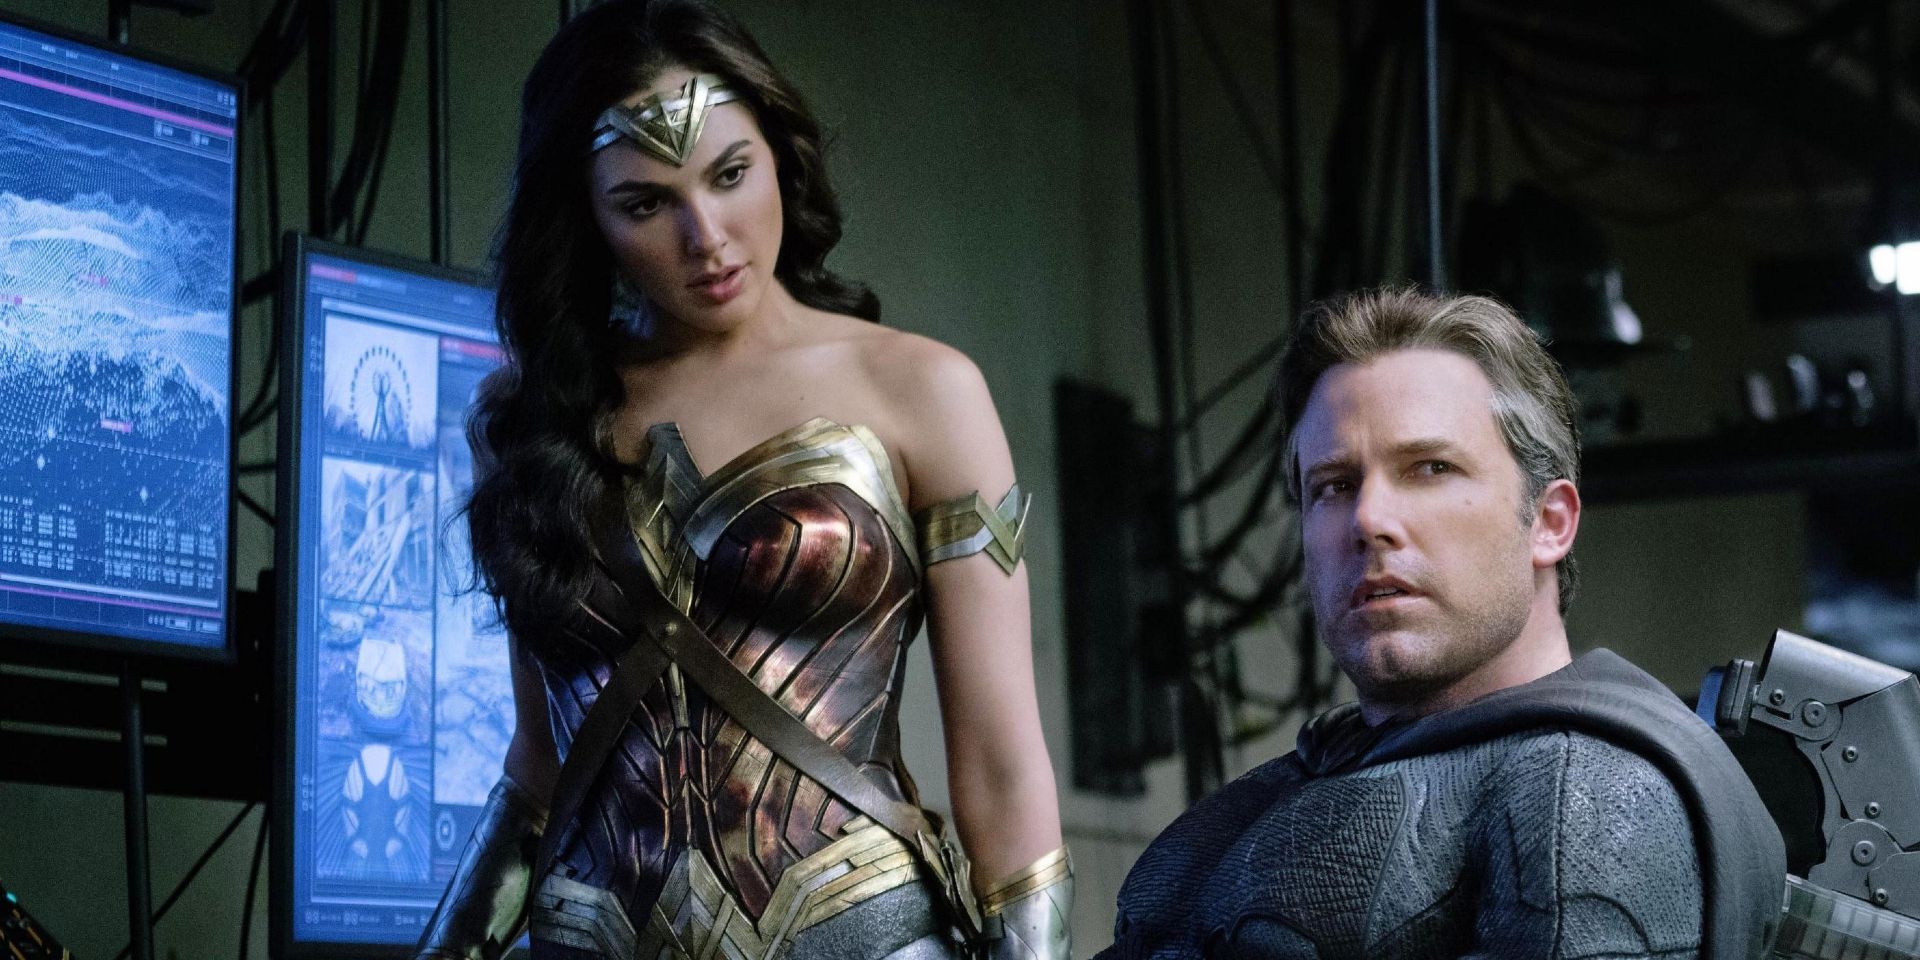 Batman and Wonder Woman in the batcave in Justice League